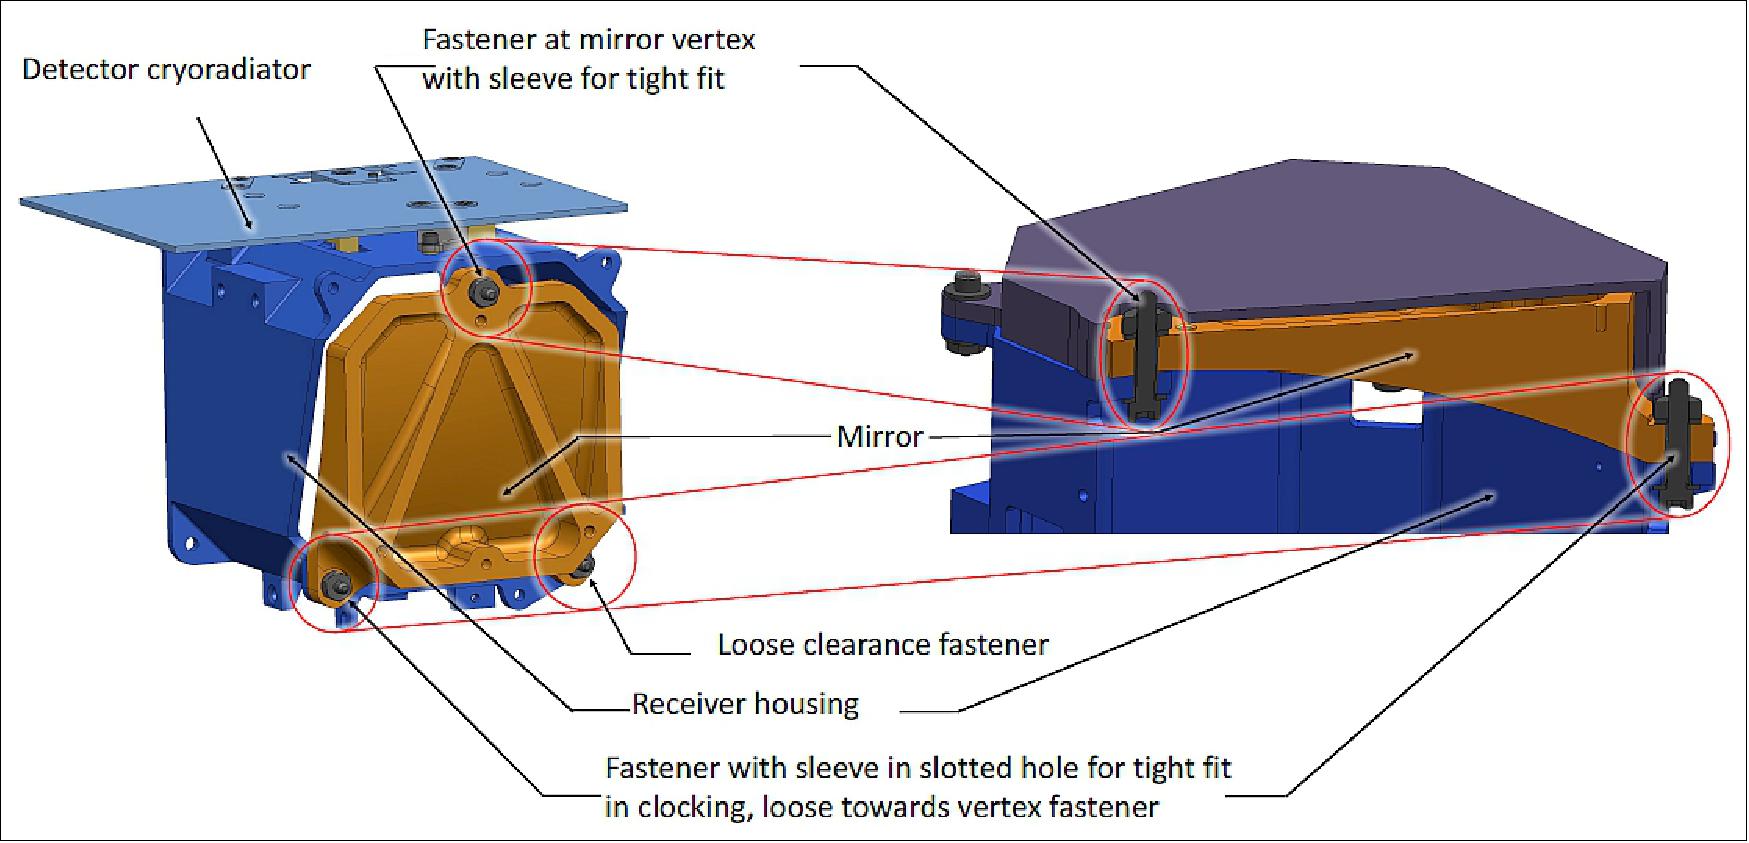 Figure 13: Left: Receiver module with cryoradiator. Right: section view showing fastener detail of the semi-kinematic snap-together design (figure updated from Ref. 12), image credit: LF collaboration